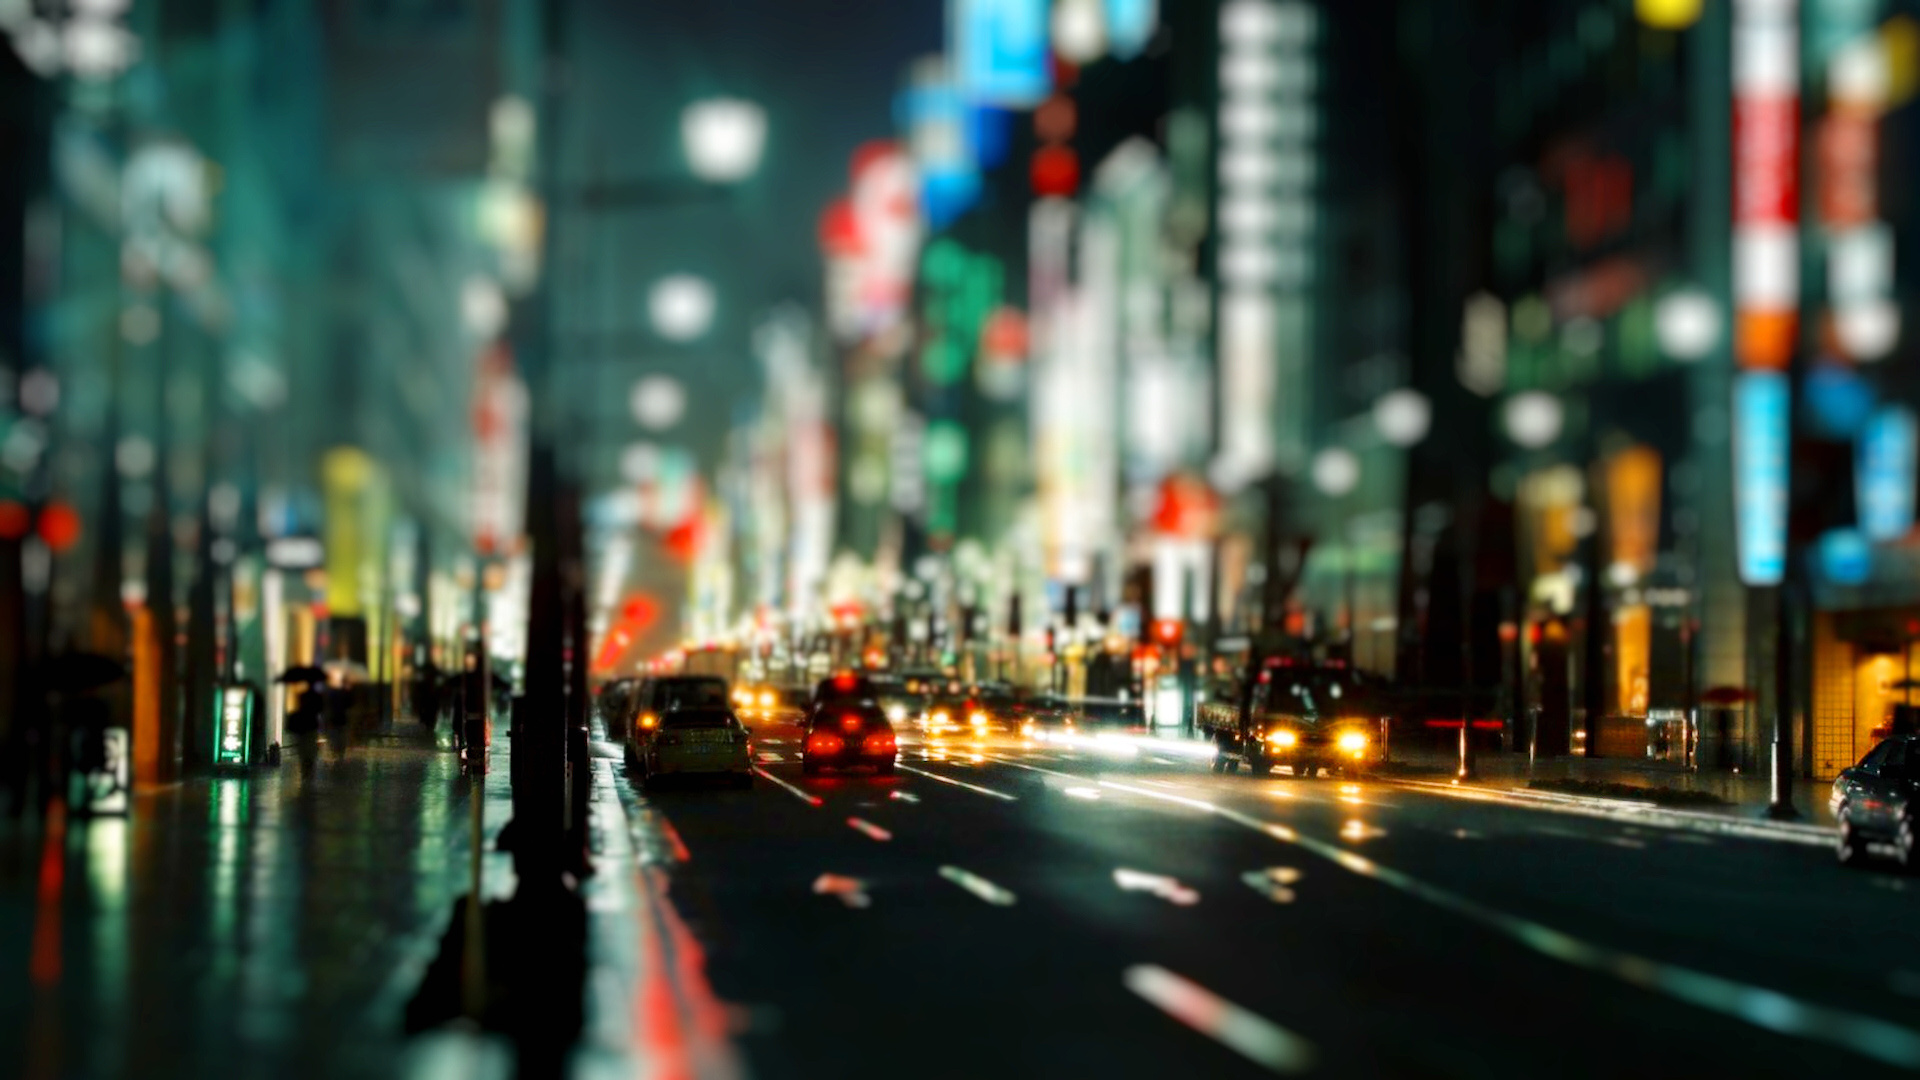 Street lights, Abstract, City, Colours, Cool, Evening, Lights, Night